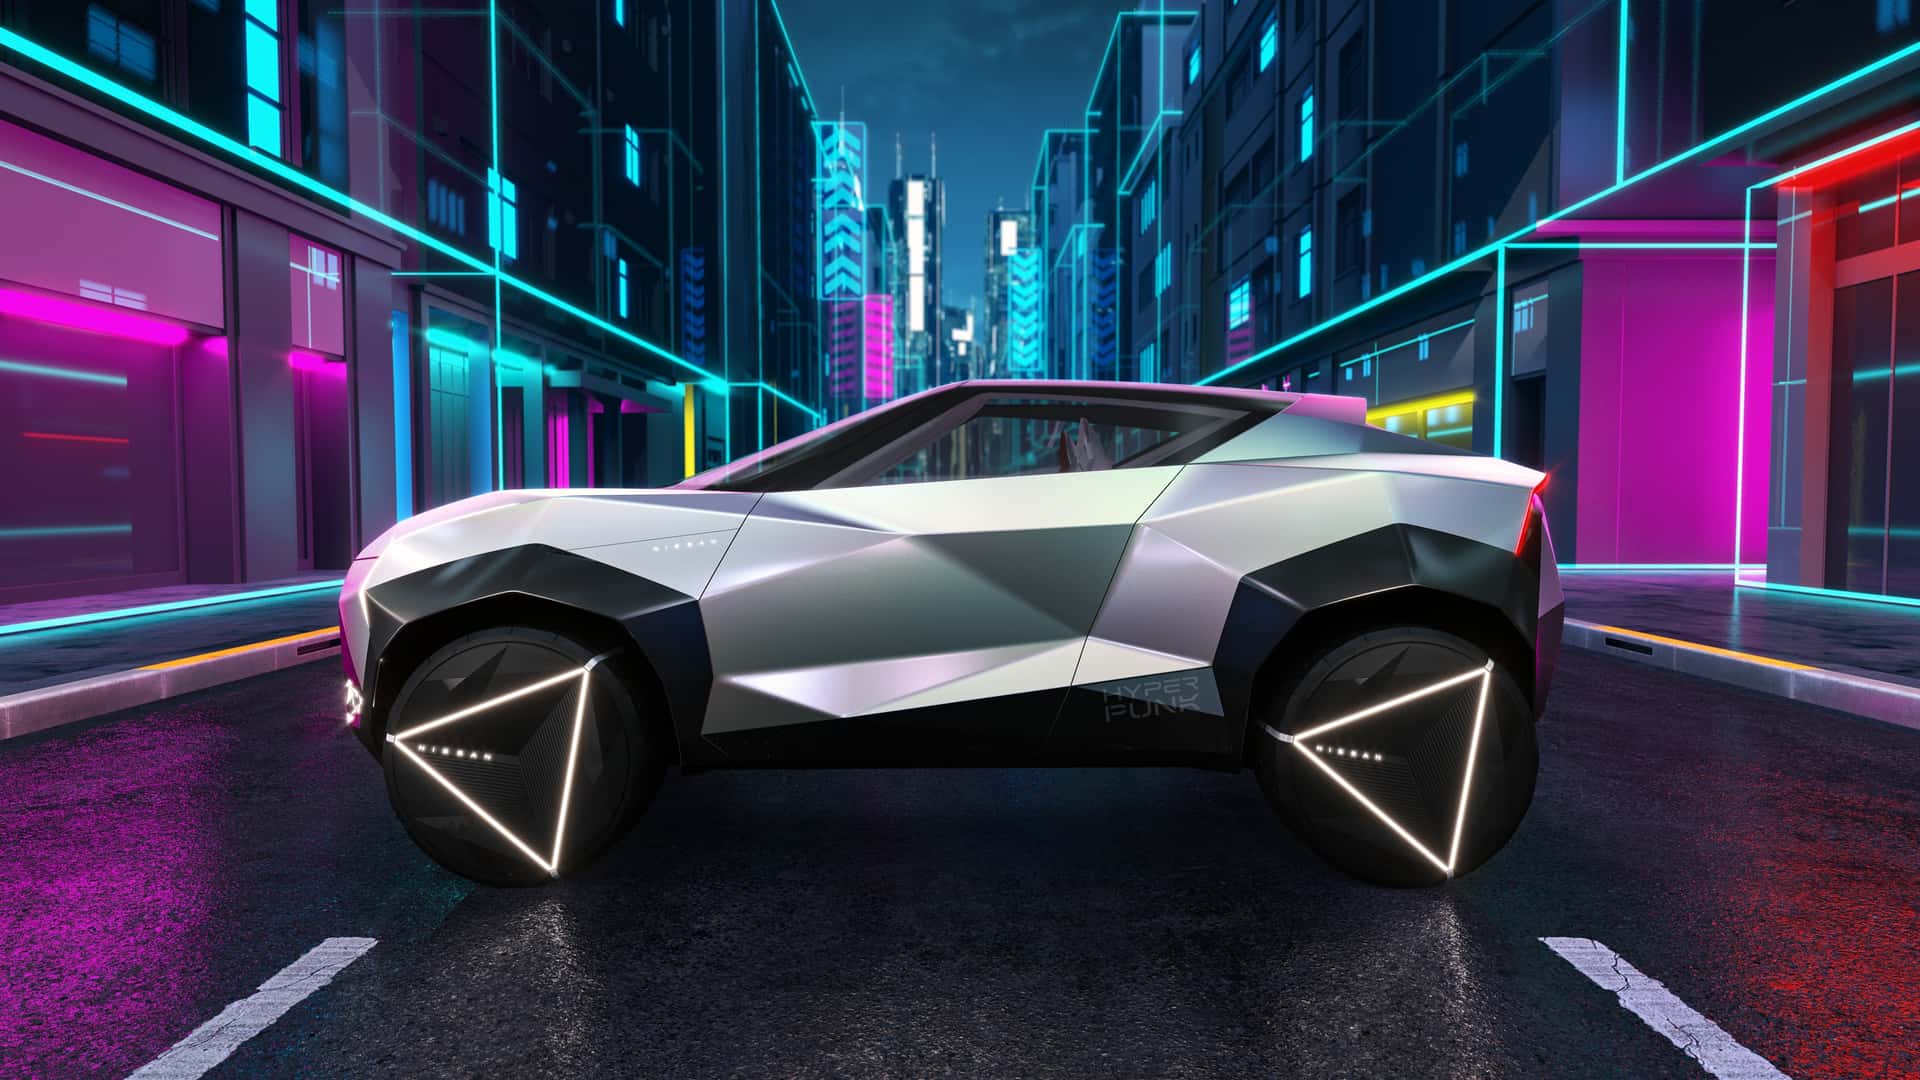 nissan’s hyper punk concept is a two-door crossover for online influencers